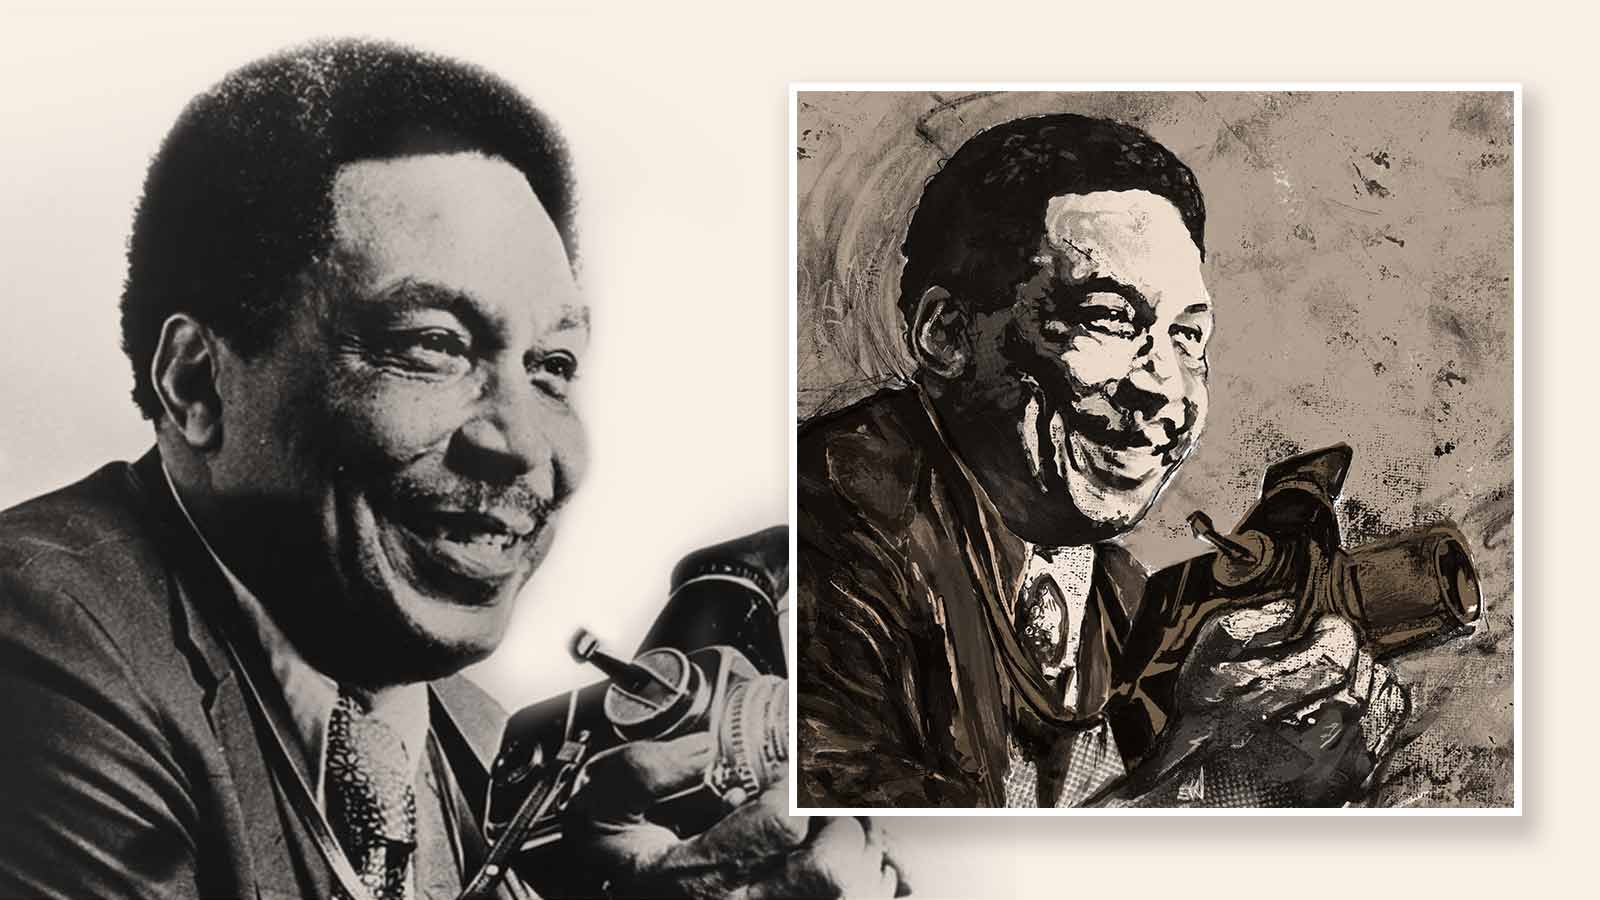 Image showing original photo of Ernest Withers alongside the NFT image it inspired.